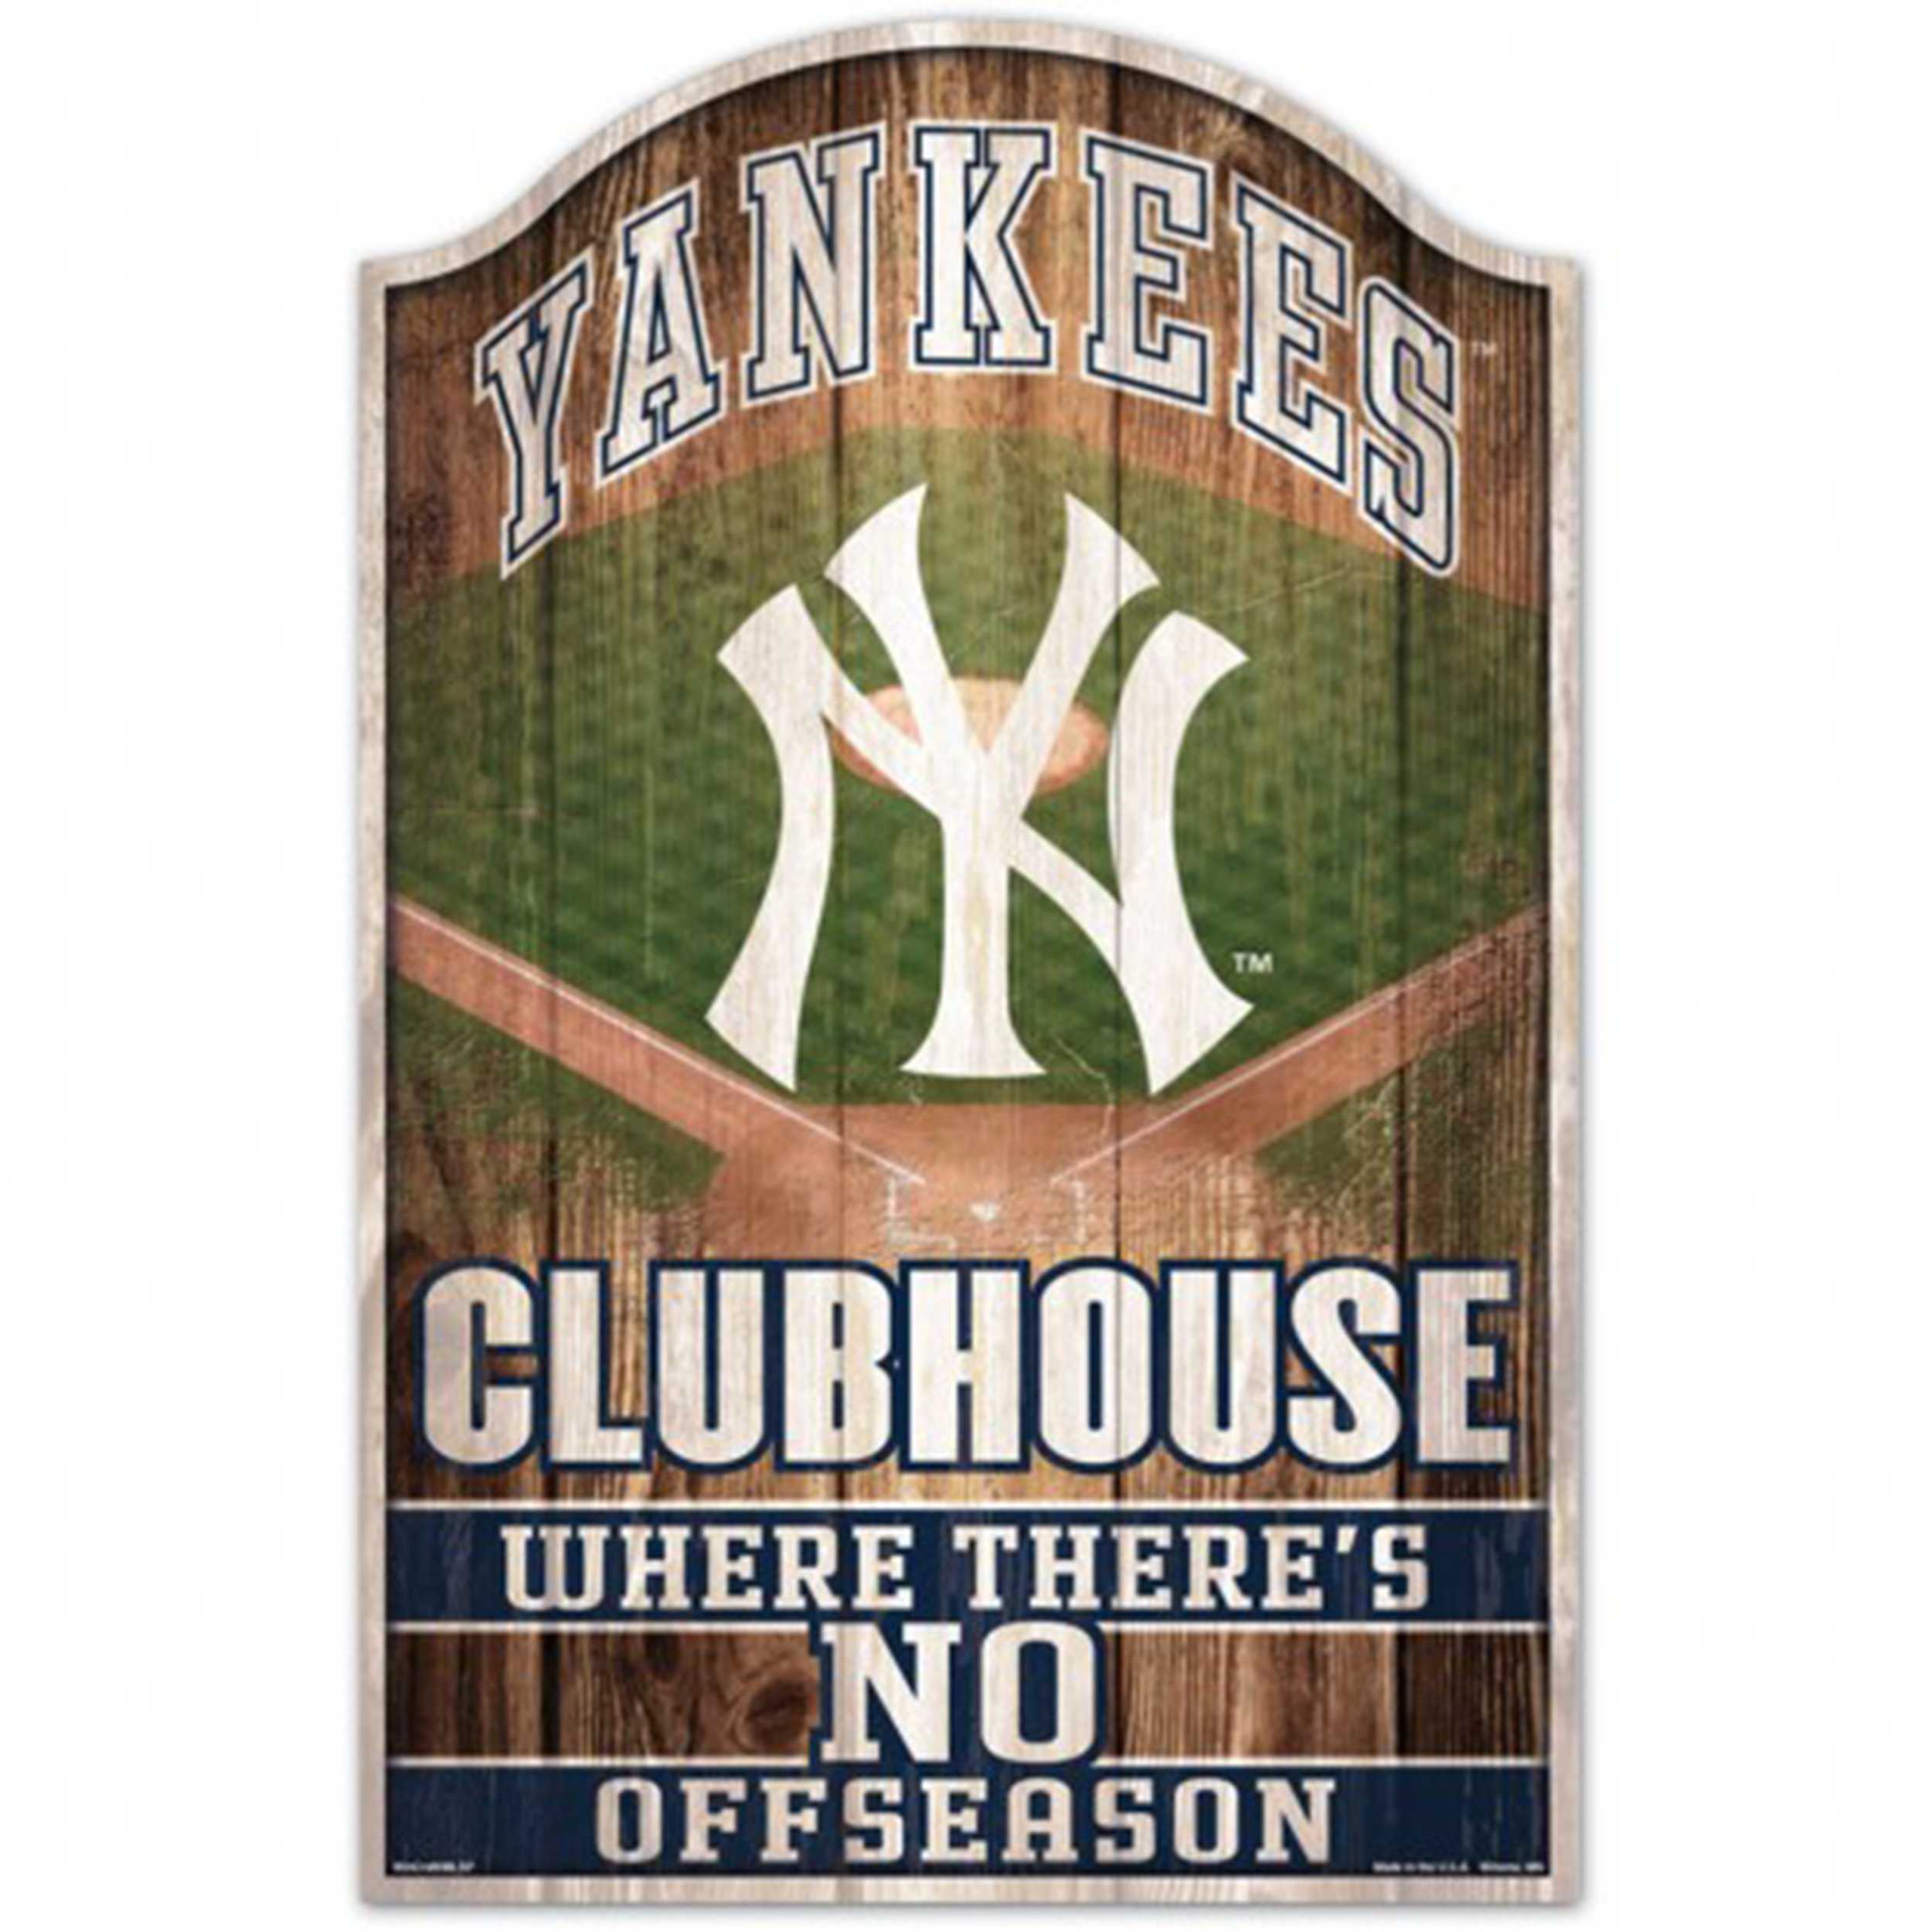 NEW YORK YANKEES FAN CAVE WOOD SIGN